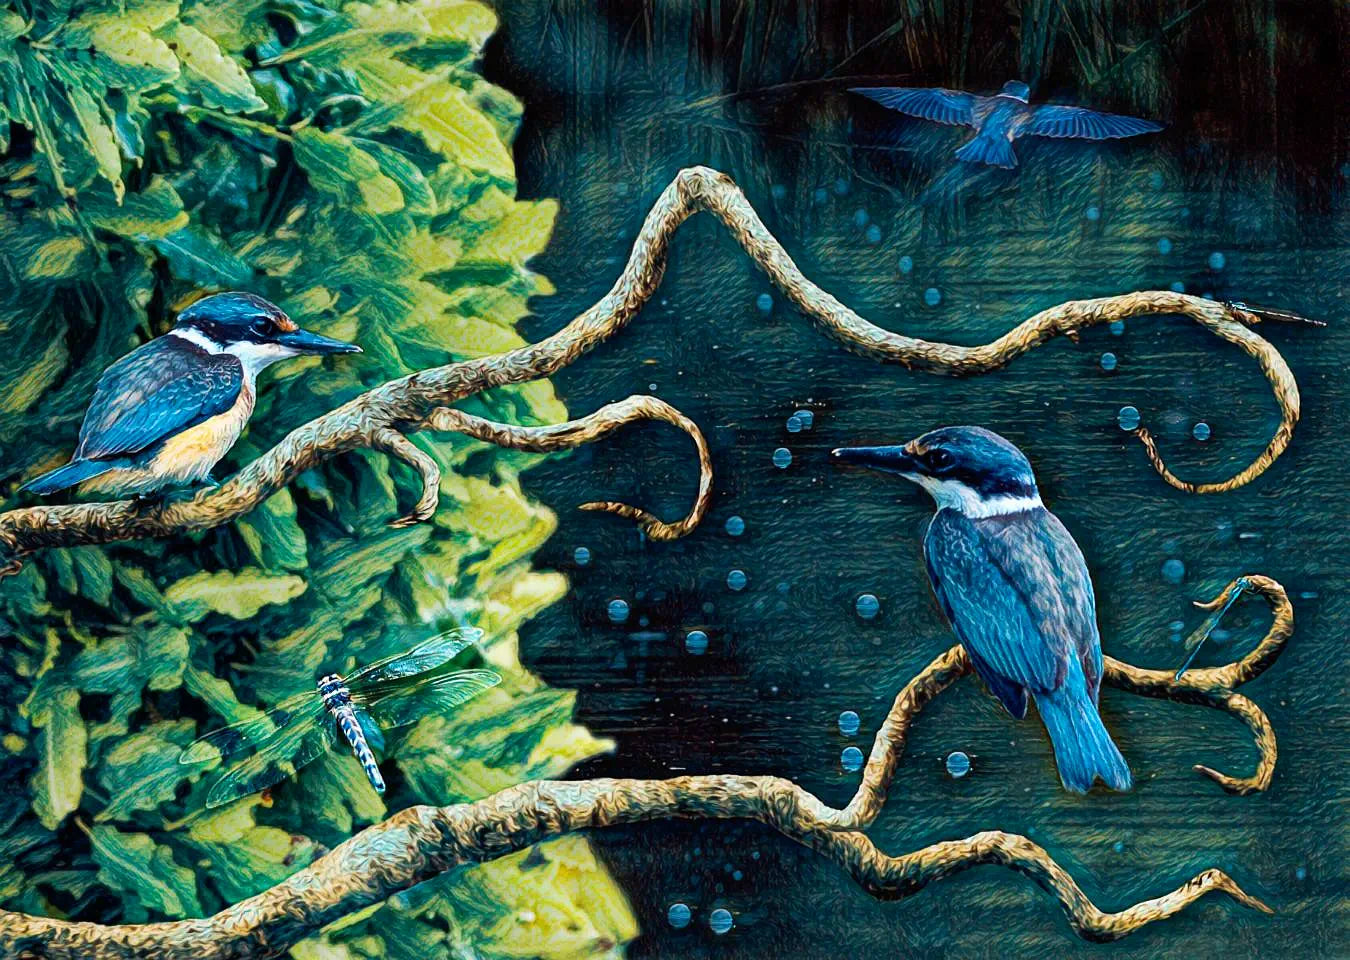 Two kotare or sacred kingfishers perch on a curvy branch while another flies away. The backdrop is a wetland landscape with dragon flies and damselflies